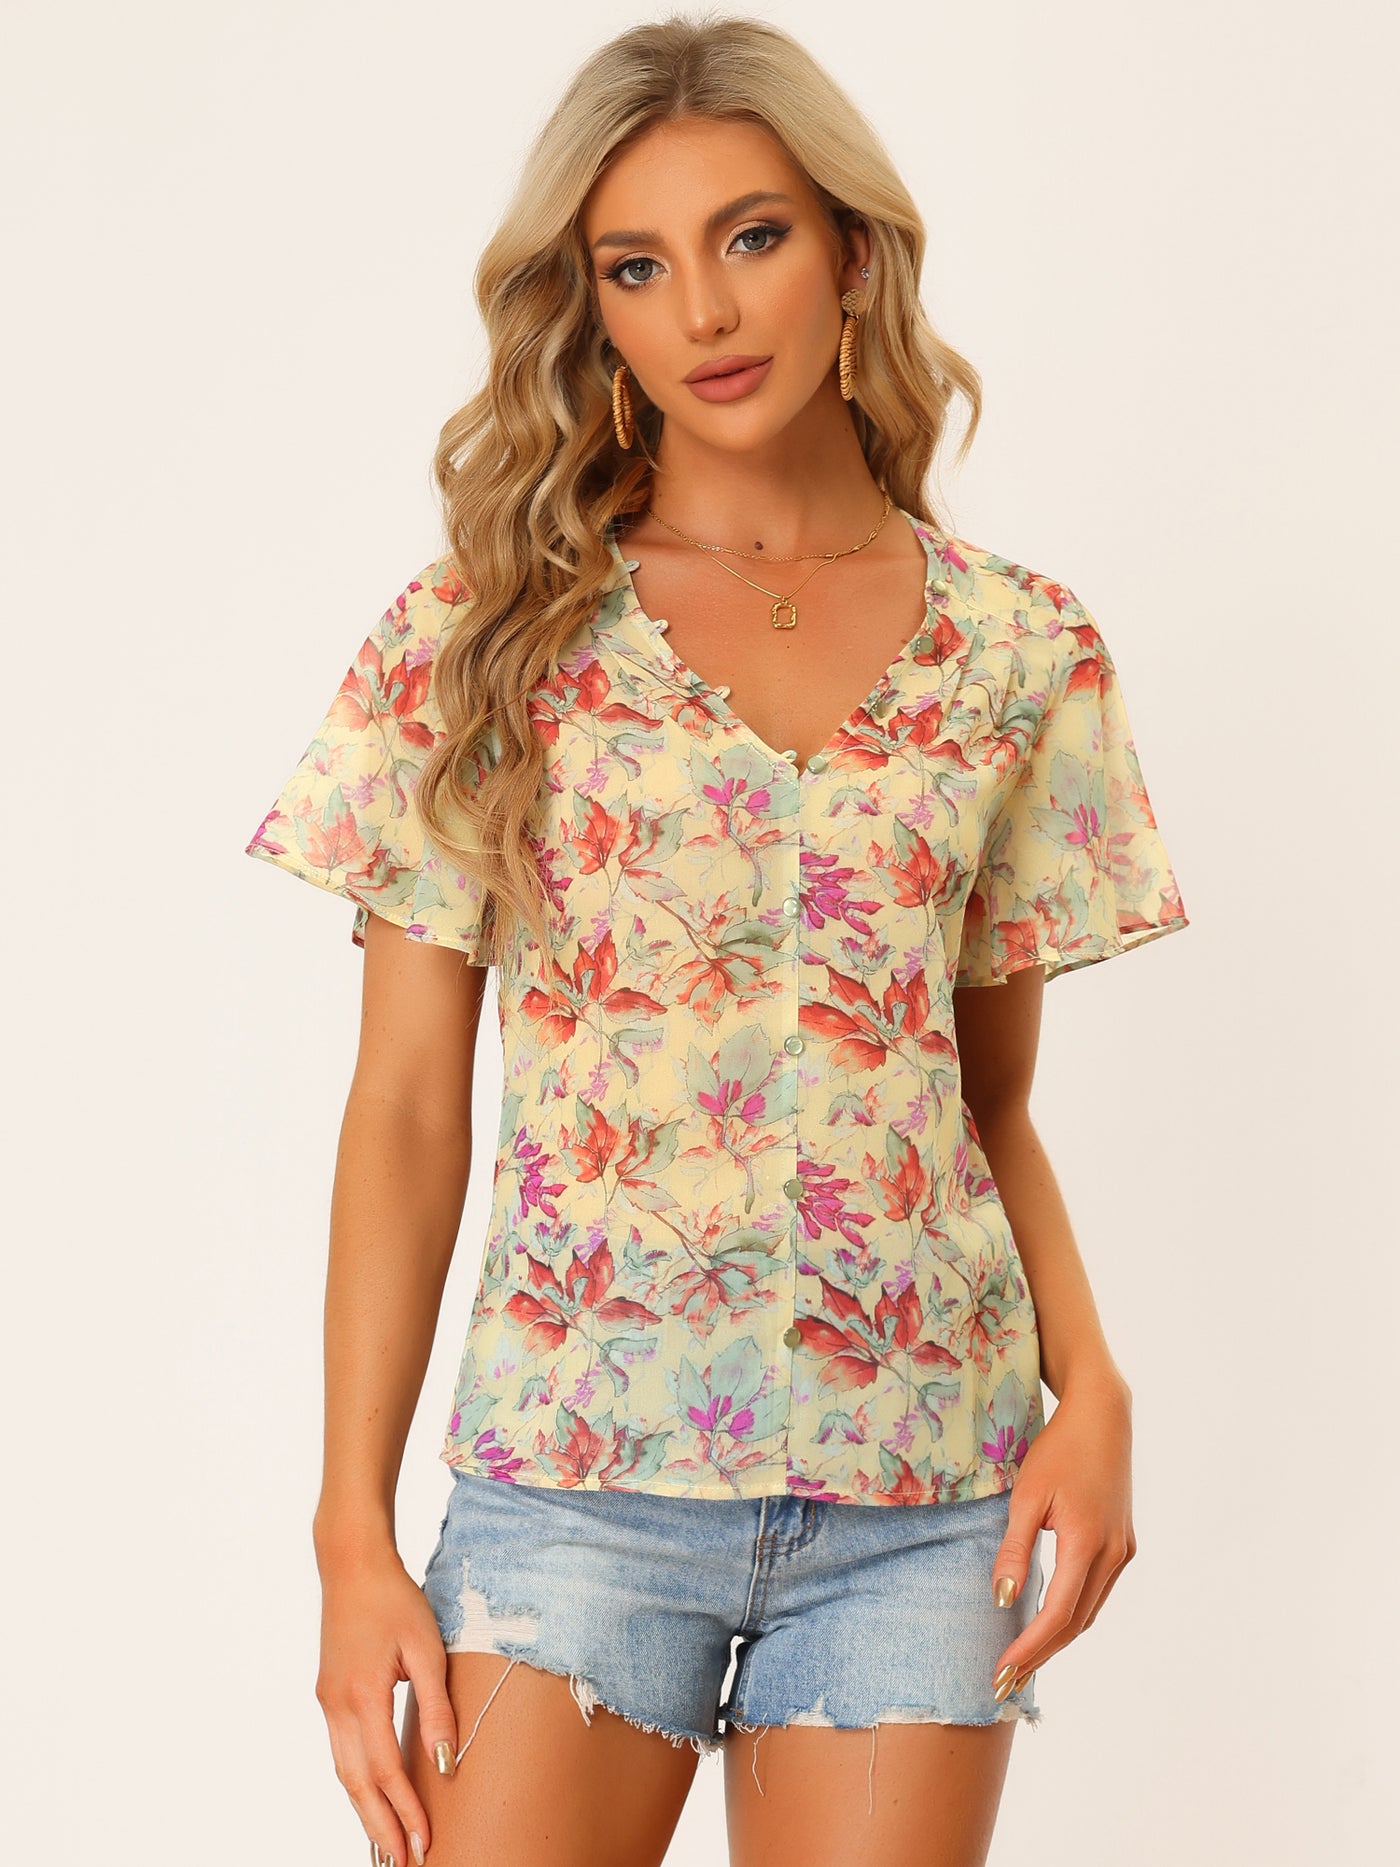 Allegra K Casual Boho Floral Ruffle Sleeve Button Front Chiffon Blouse Top